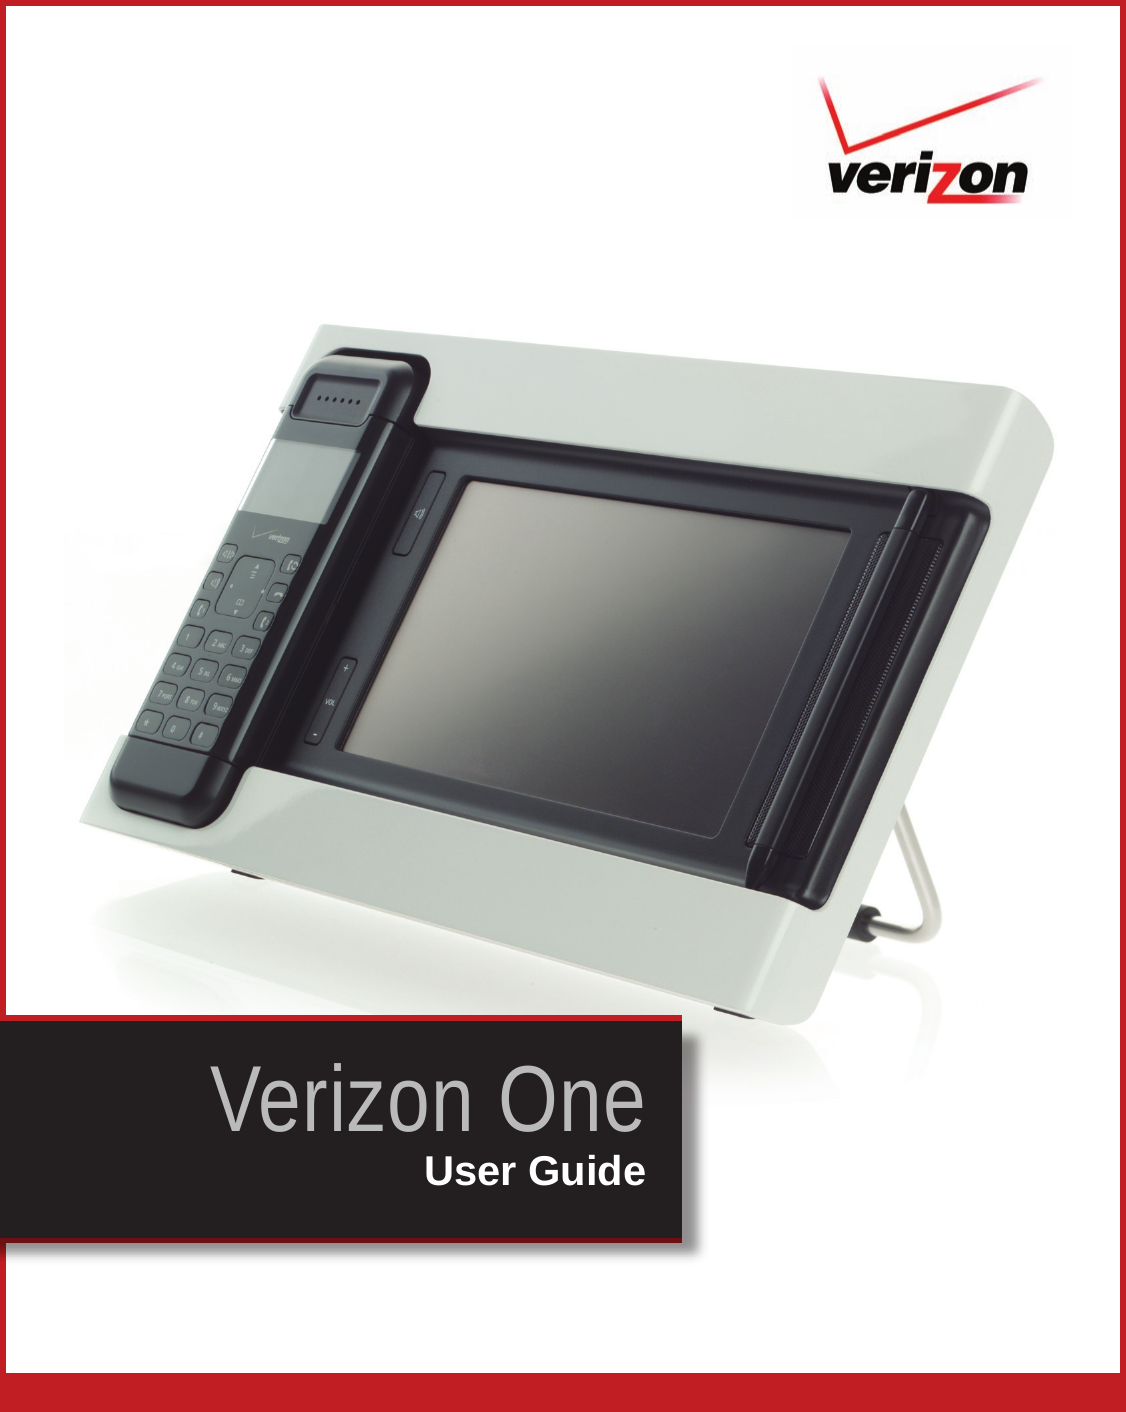 © 2007 Verizon. All Rights Reserved.Verizon One User Guide